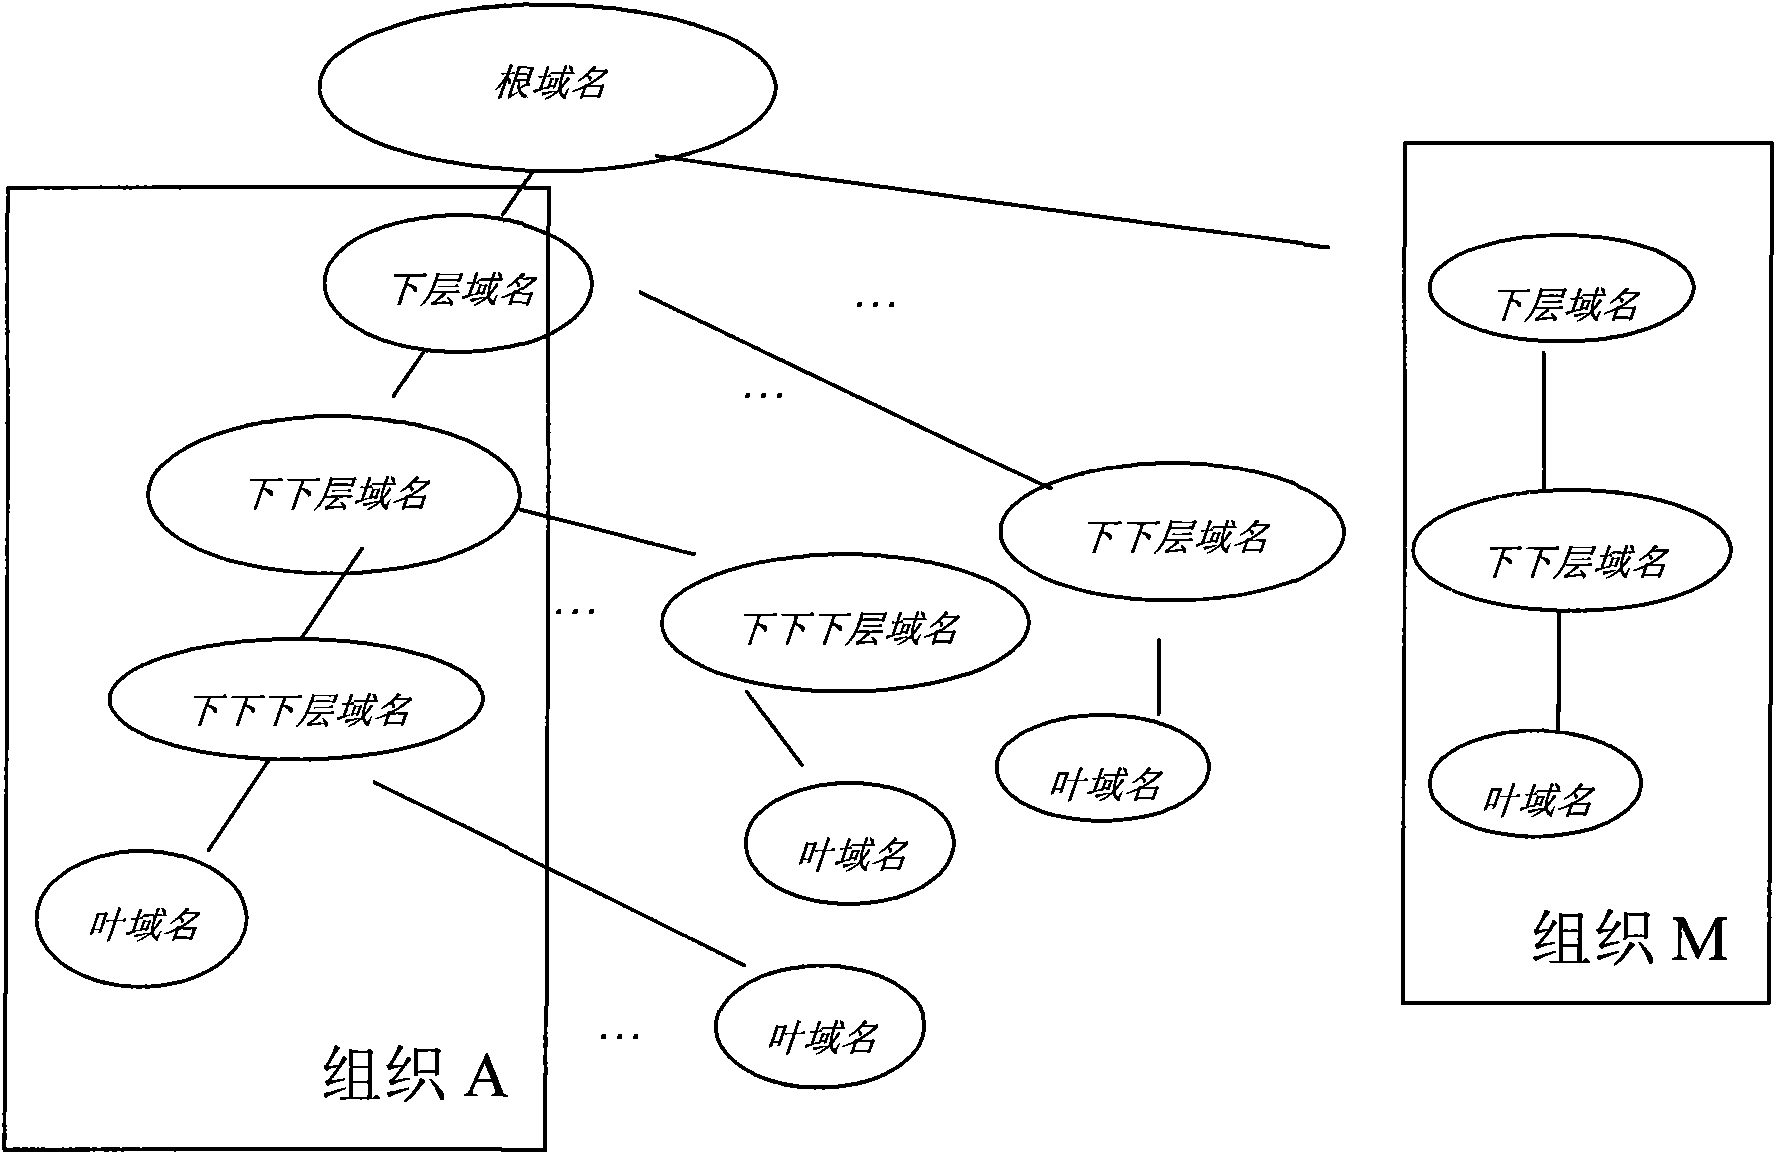 Method for constructing P2P network for vertical virtual group